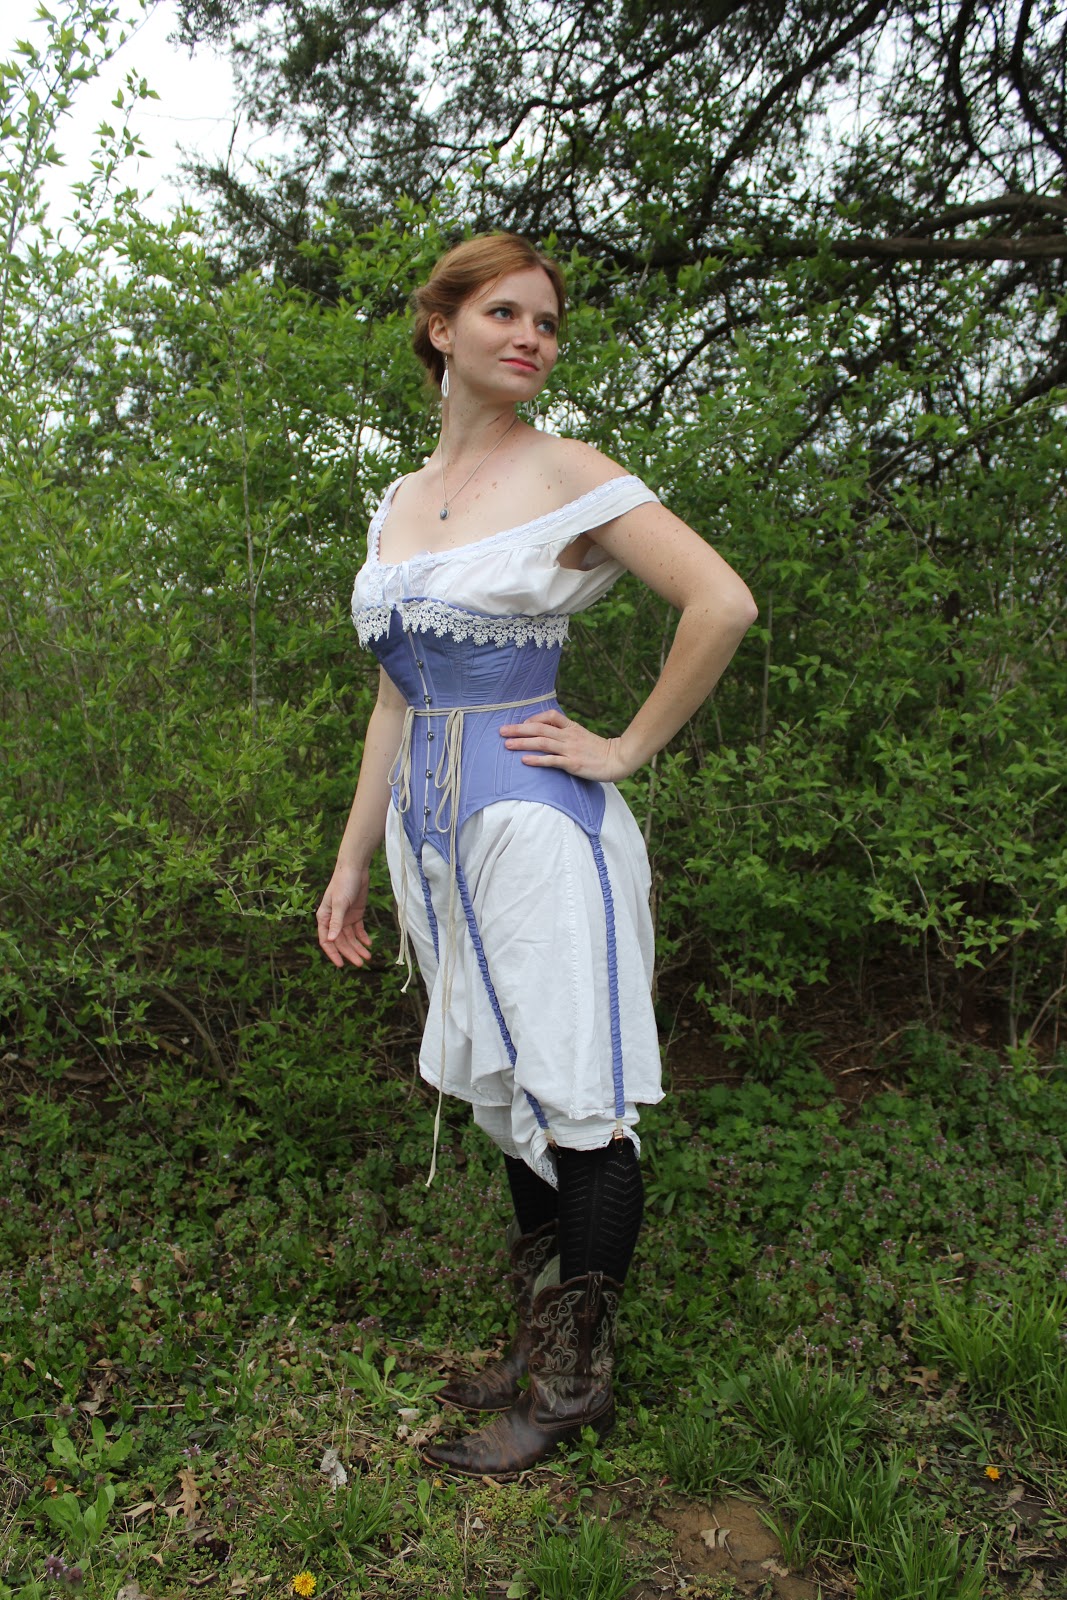 The Sewing Goatherd: Attempting to Make an S-Bend Corset